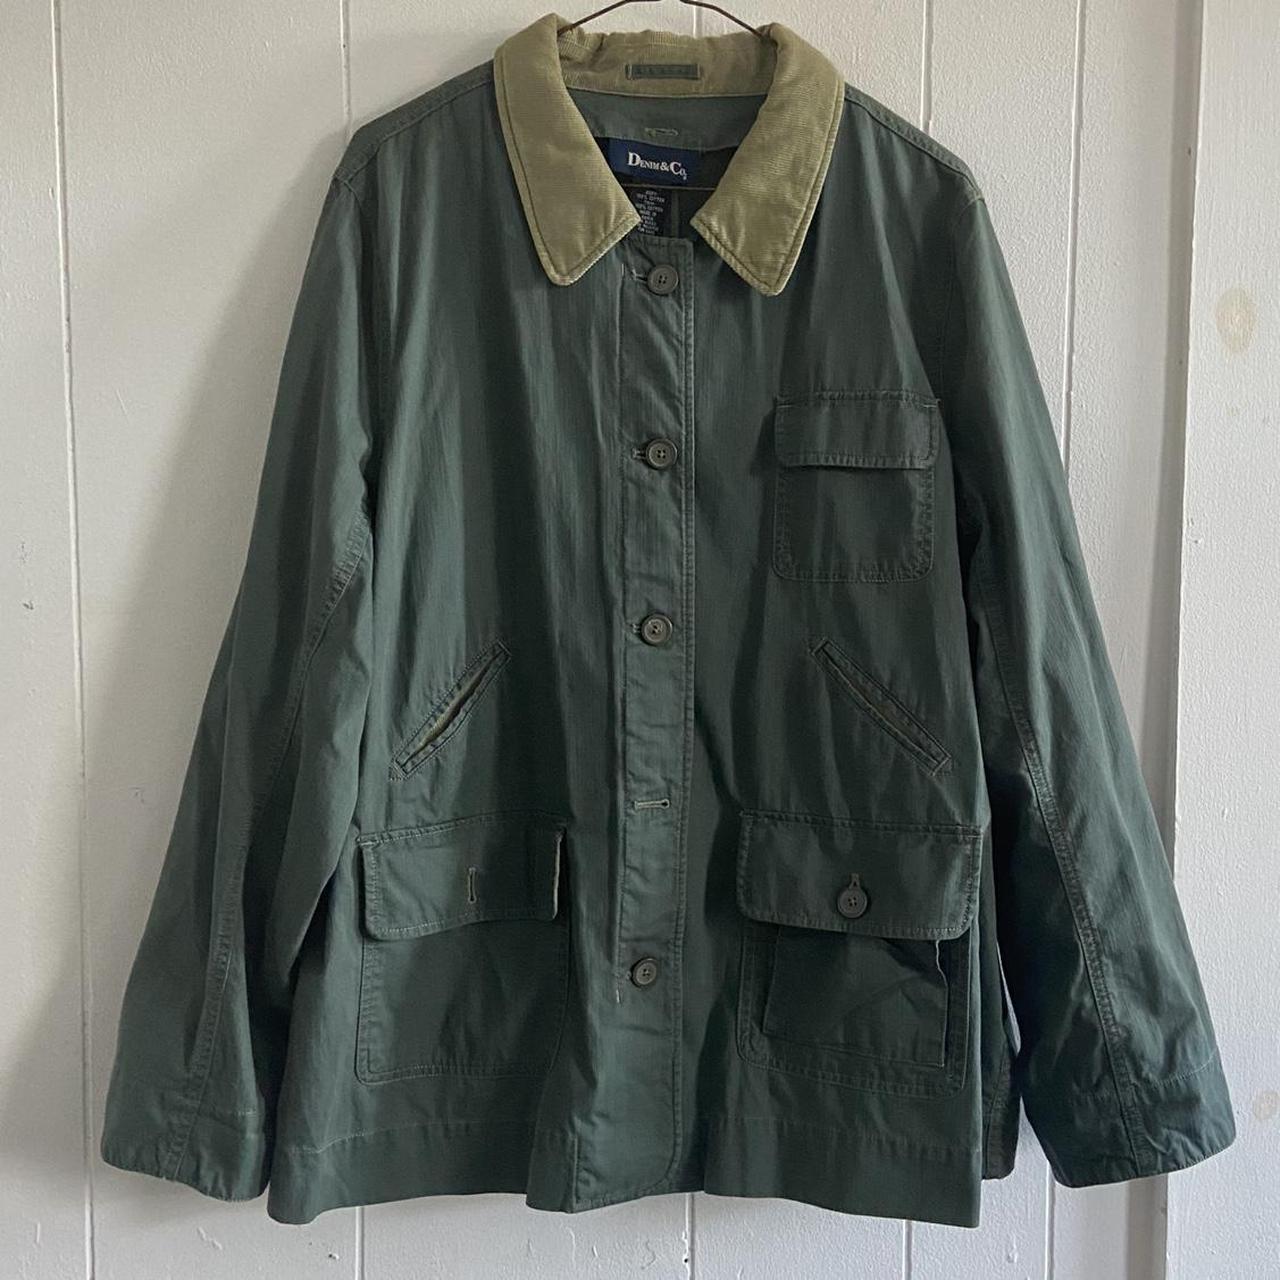 Vintage 90s utility jacket with a corduroy collar by... - Depop